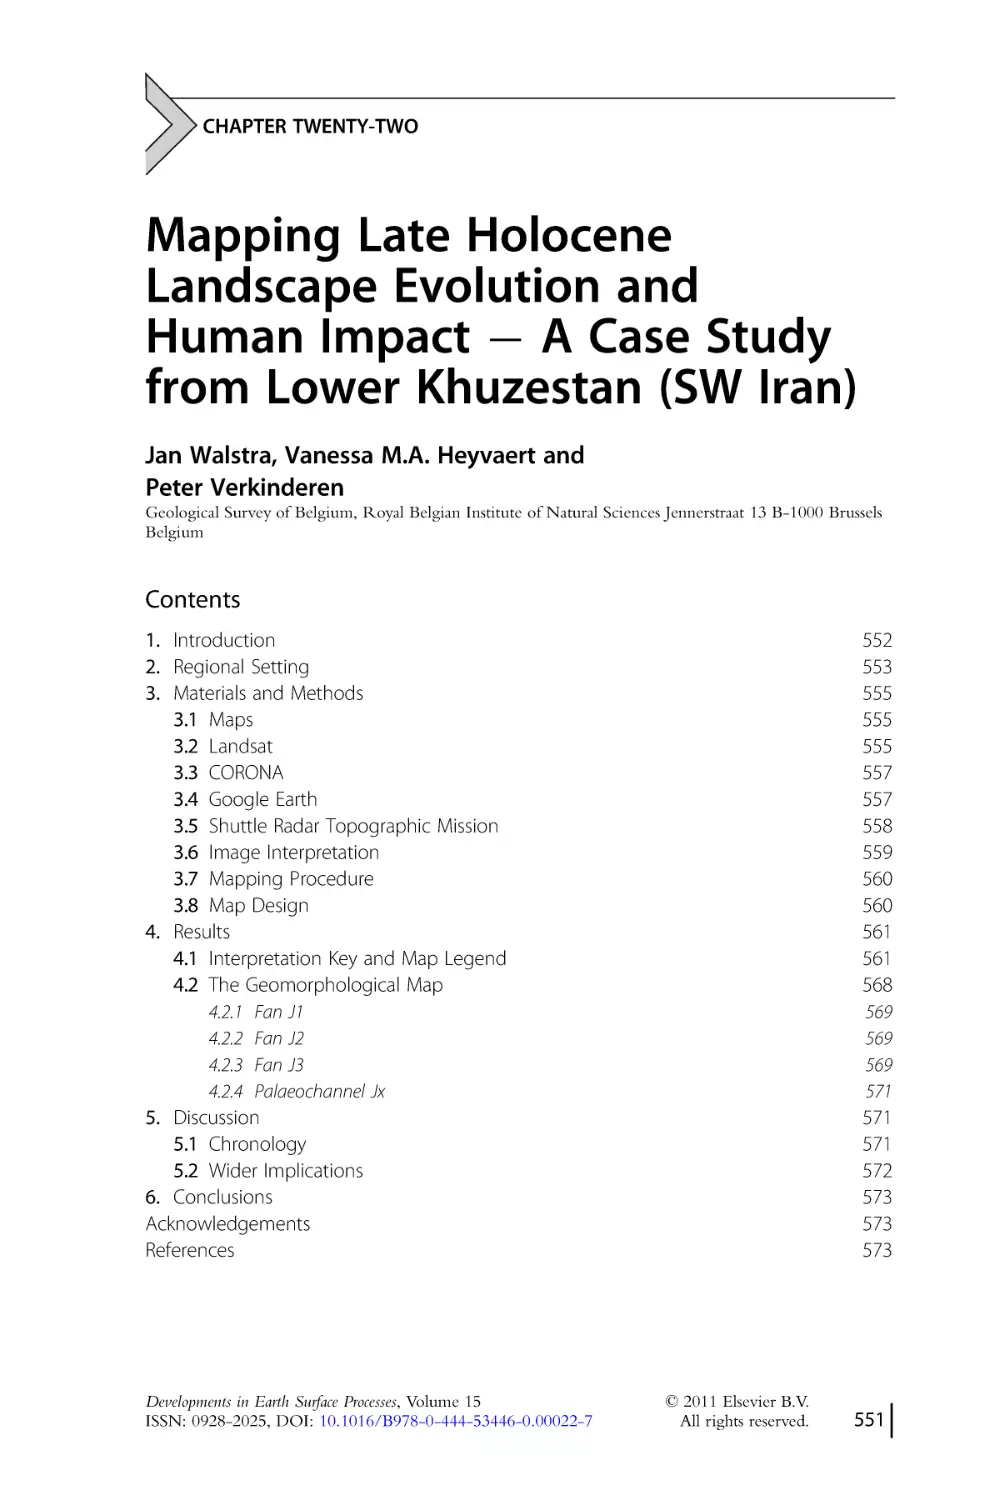 CHAPTER TWENTY-TWO. Mapping Late Holocene Landscape Evolution and Human Impact – A Case Study from Lower Khuzestan (SW Iran)